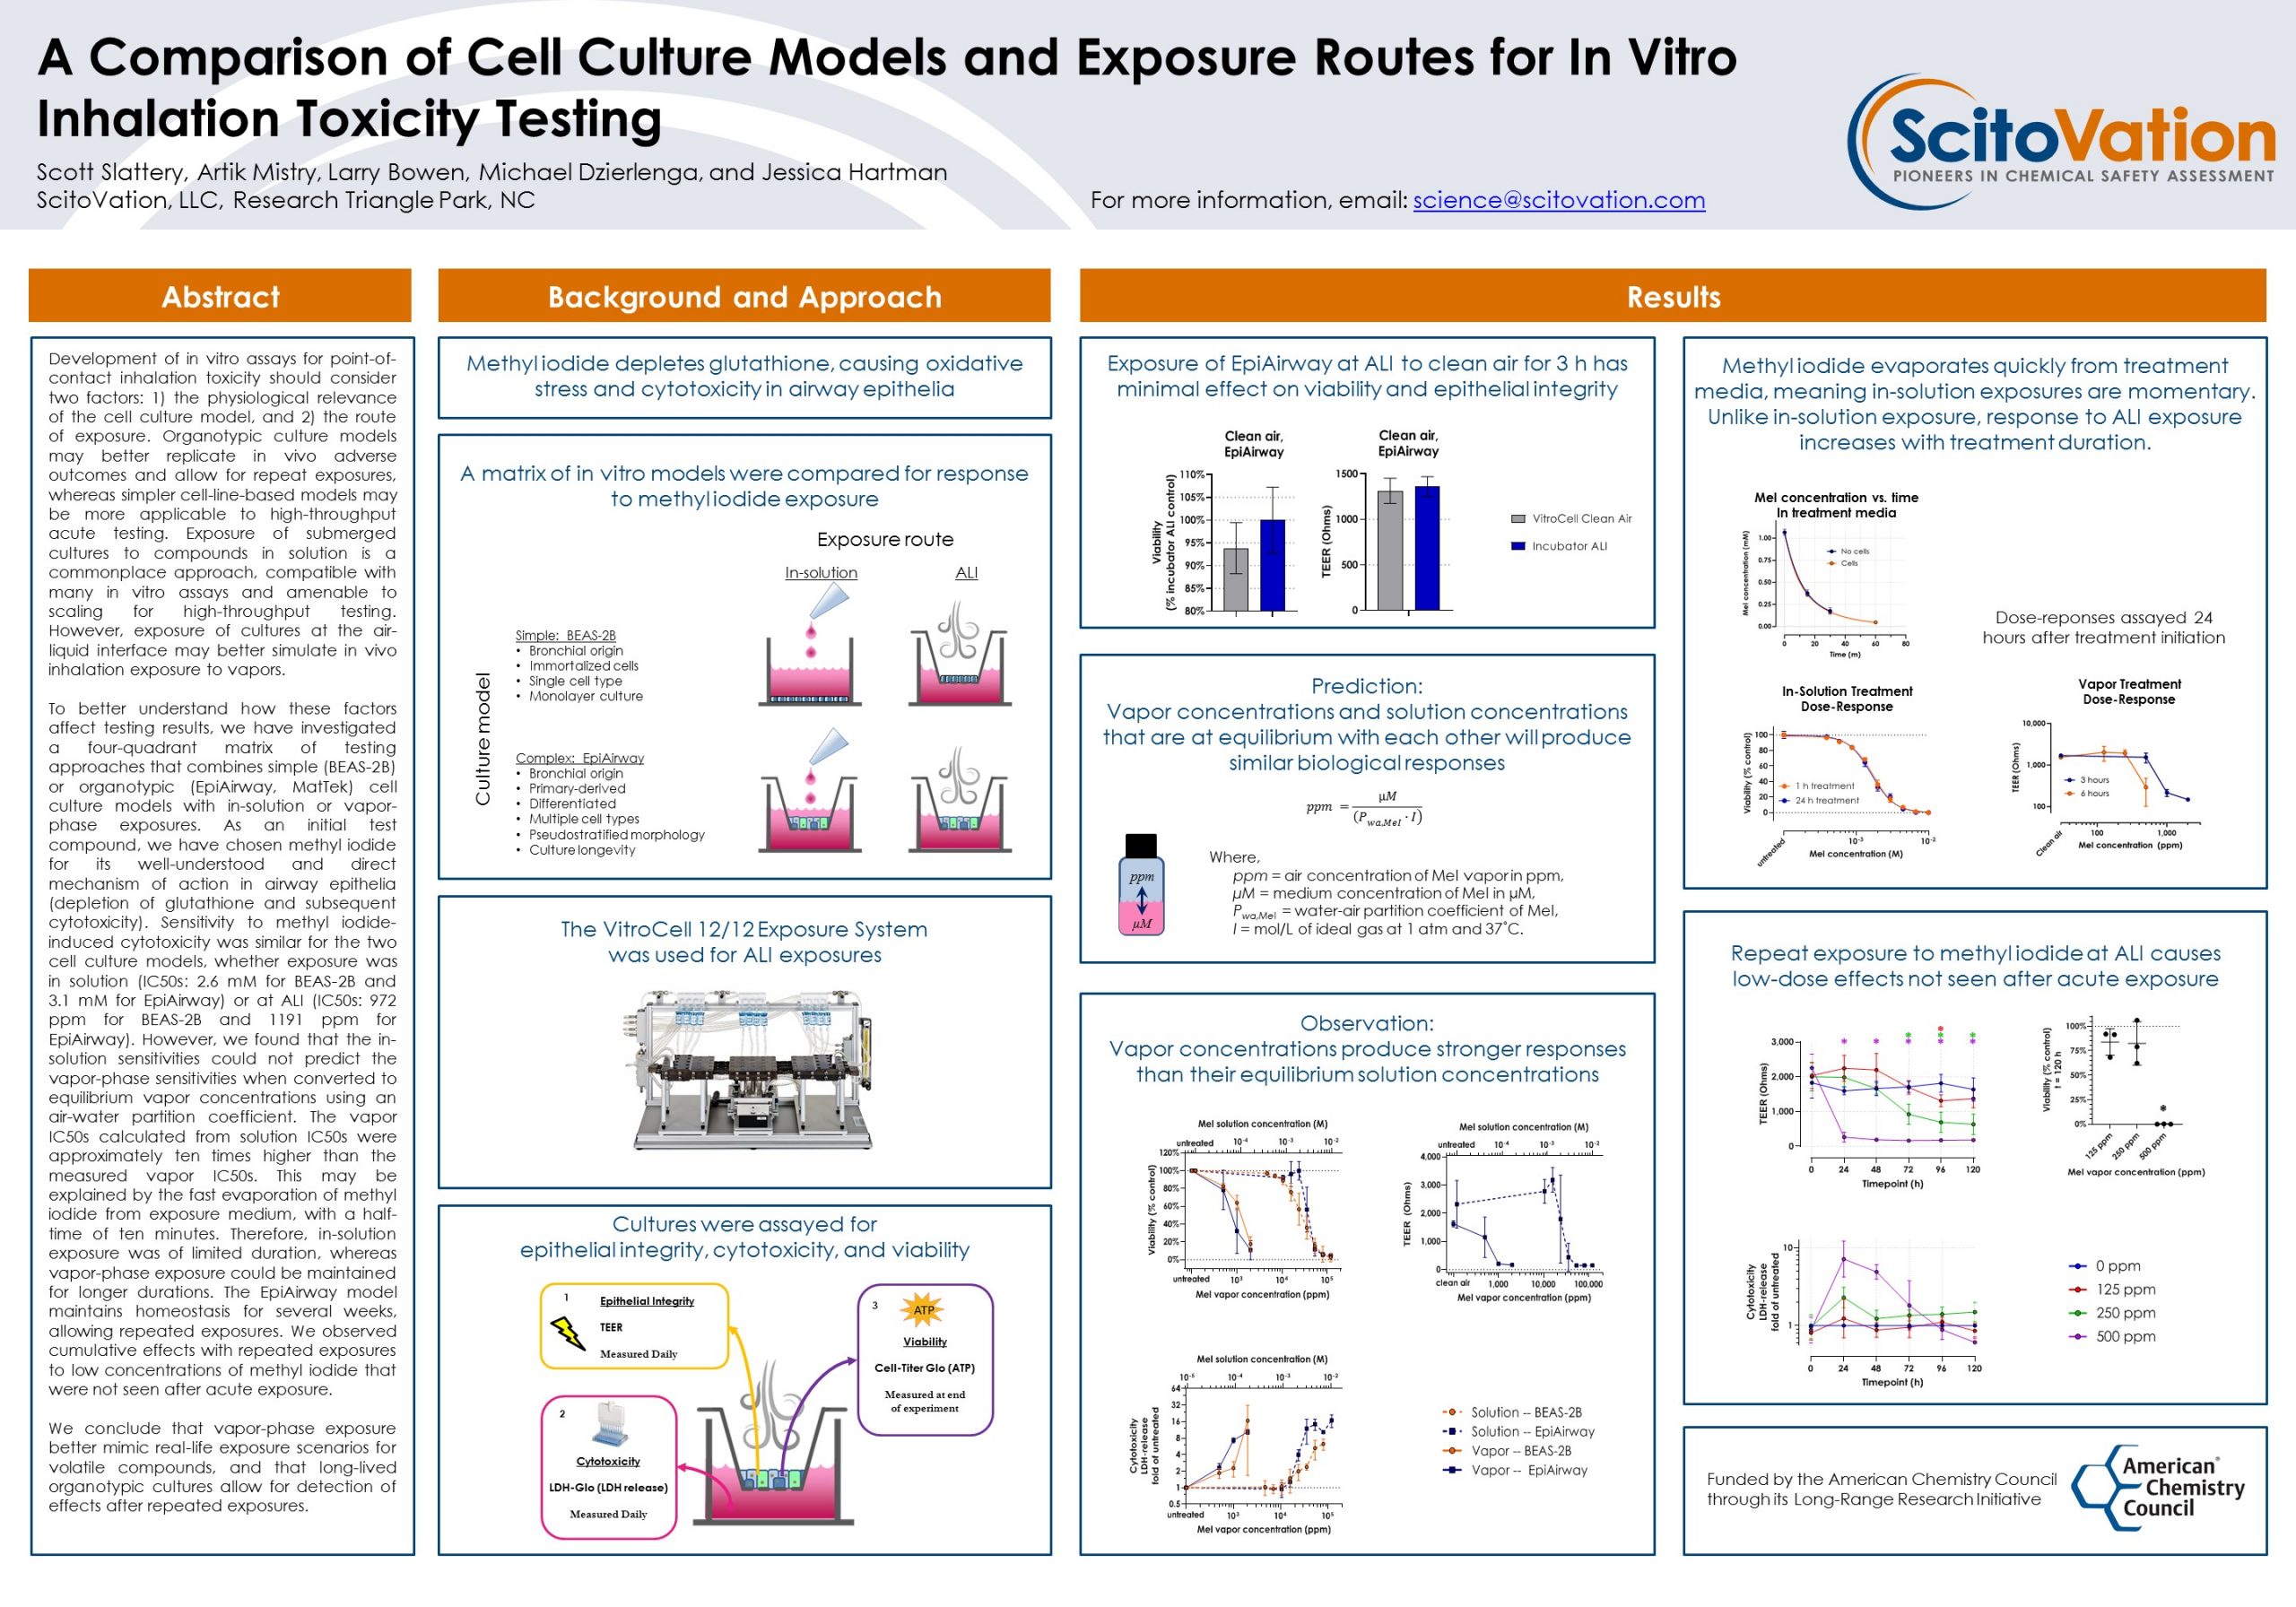 Featured image for “A Comparison of Cell Culture Models and Exposure Routes for In Vitro Inhalation Toxicity Testing”